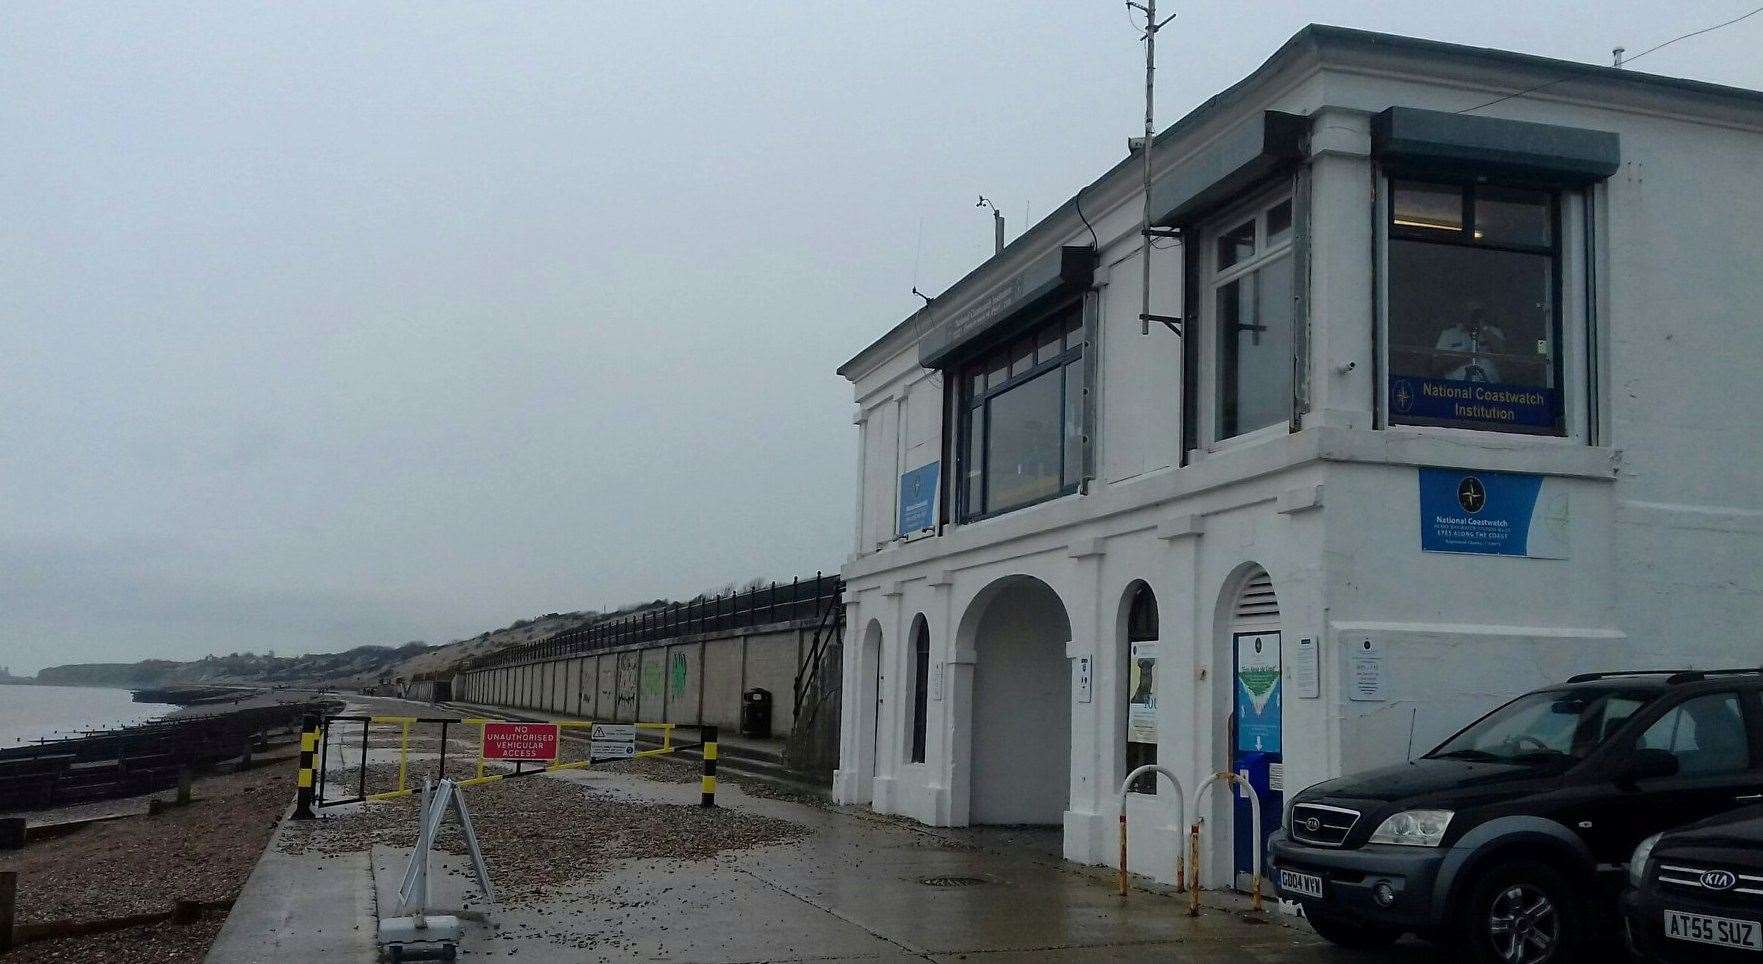 Watchkeepers have been based at the site for 22 years. Picture: NCI Herne Bay